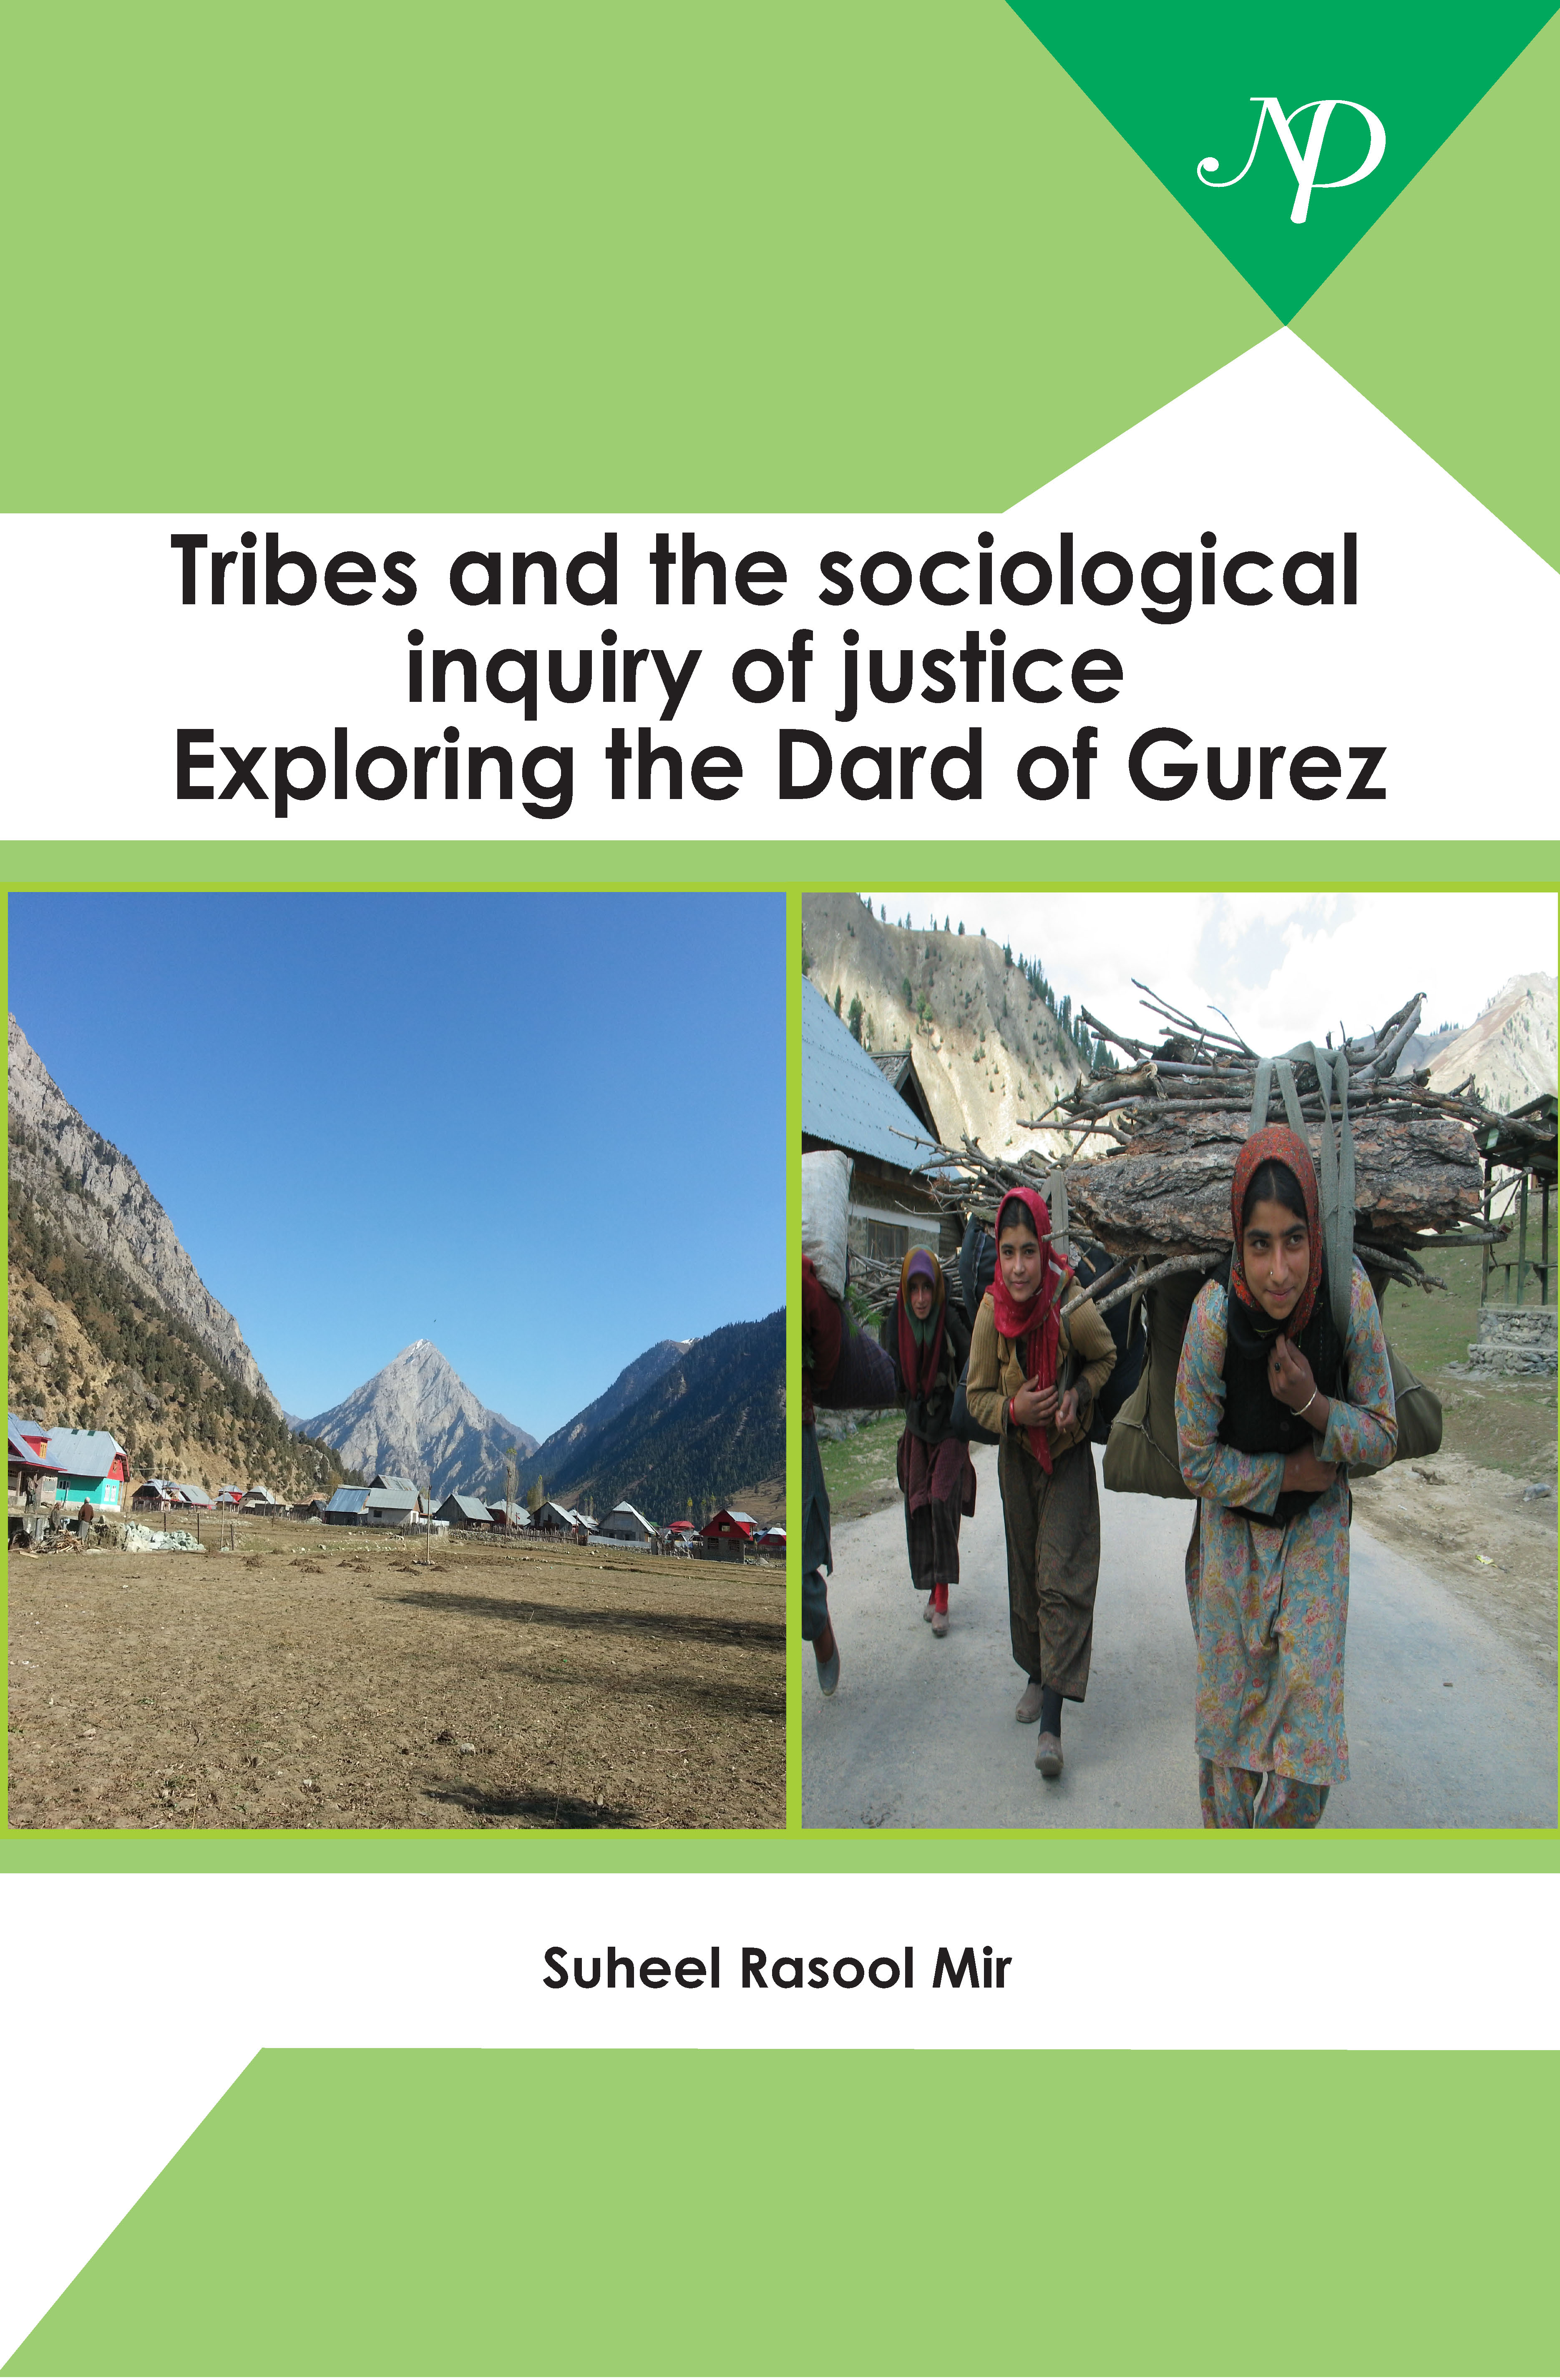 Tribes and the sociological inquiry of justice.jpg